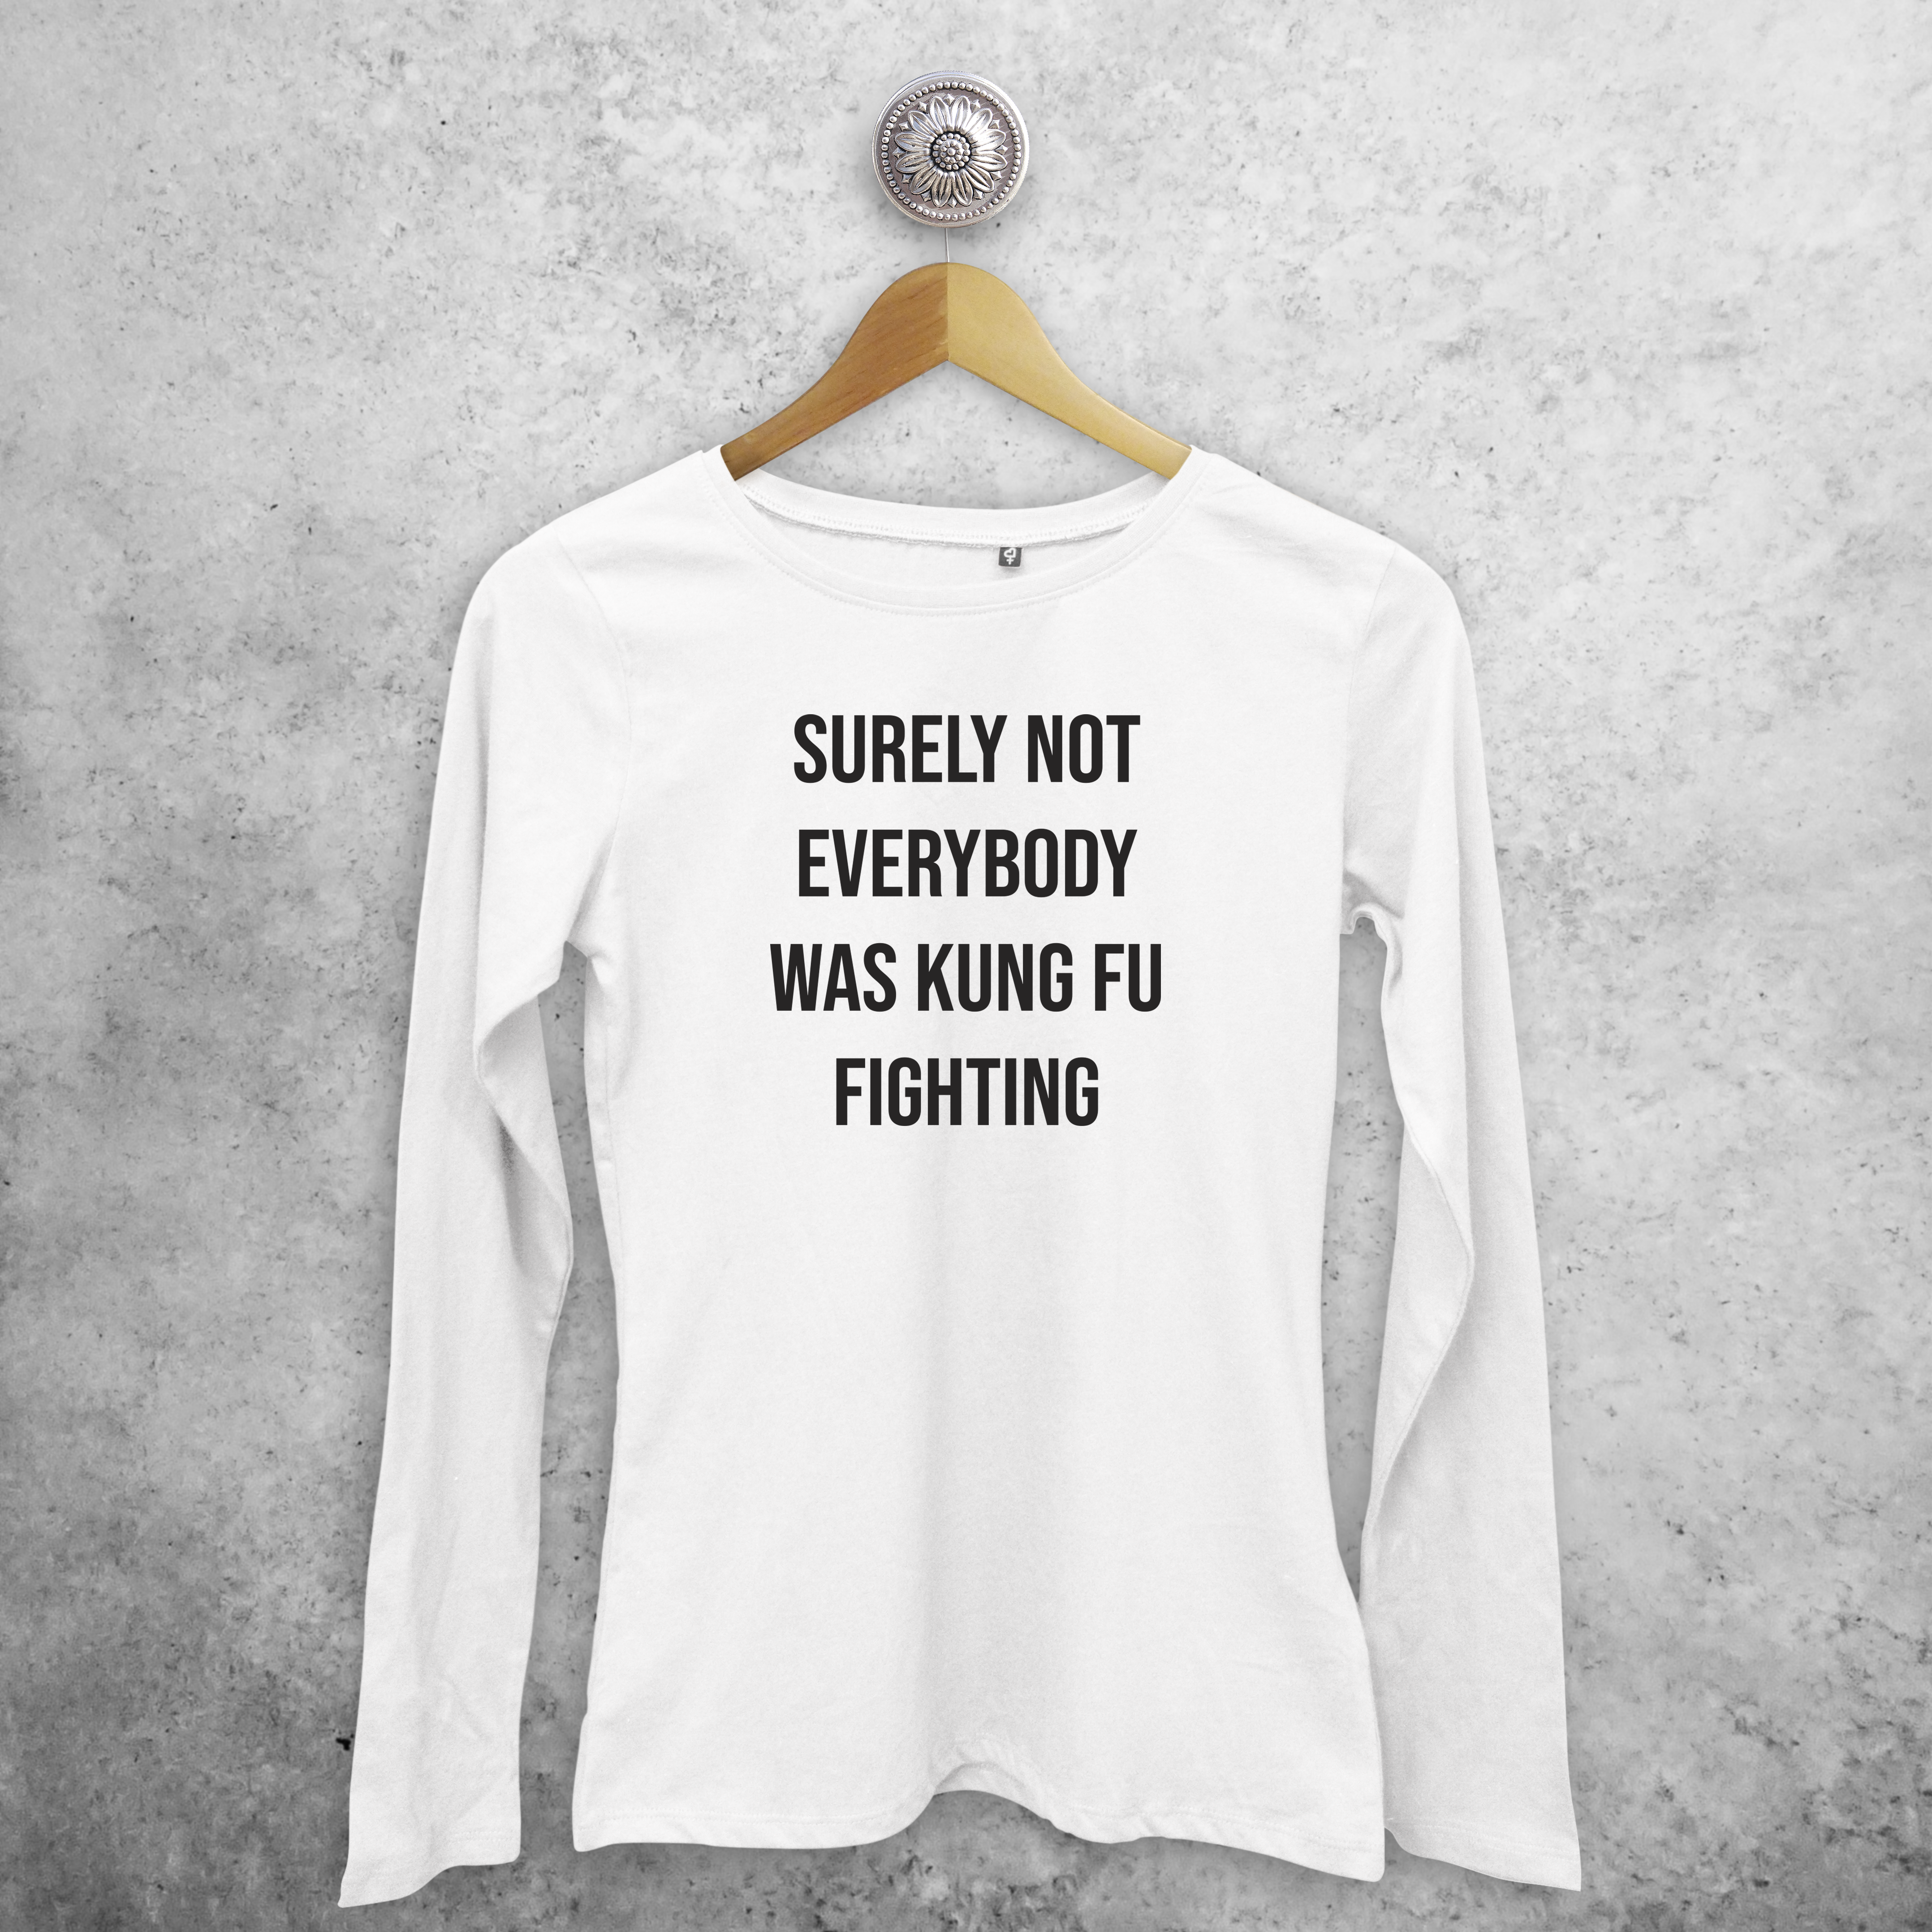 'Surely not everybody was kung fu fighting' adult longsleeve shirt